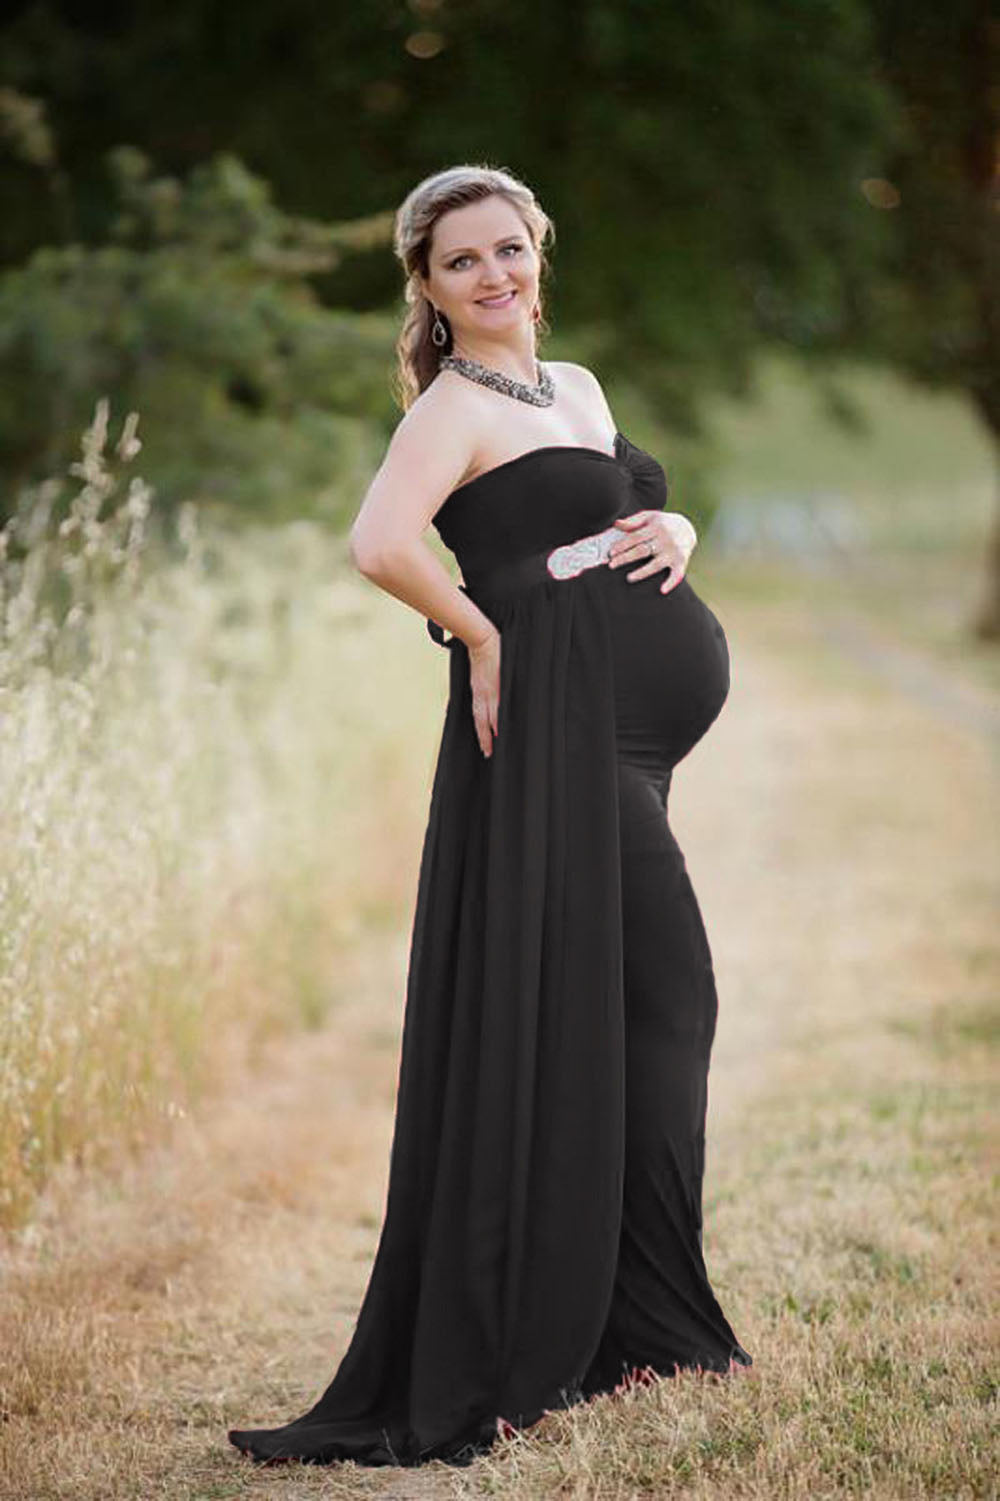 A pregnant woman in a red Maramalive™ chiffon mop skirt dress posing in a garden.